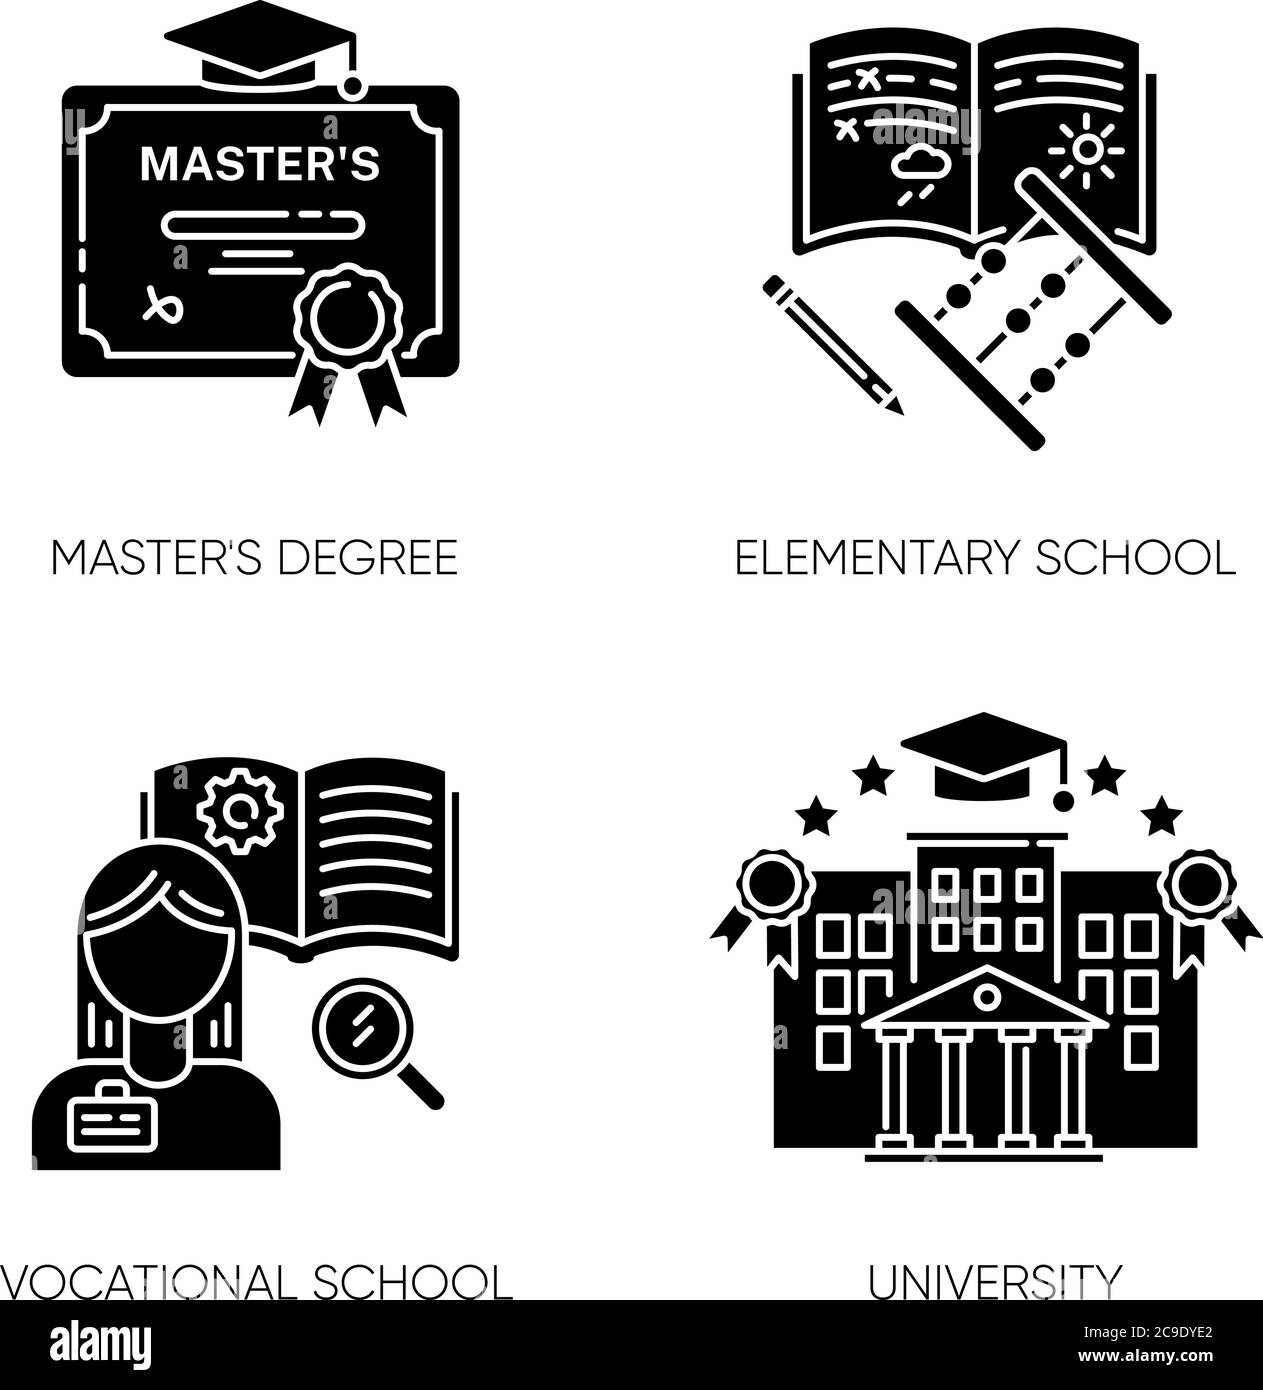 Higher Diploma Black And White Stock Photos And Images Alamy